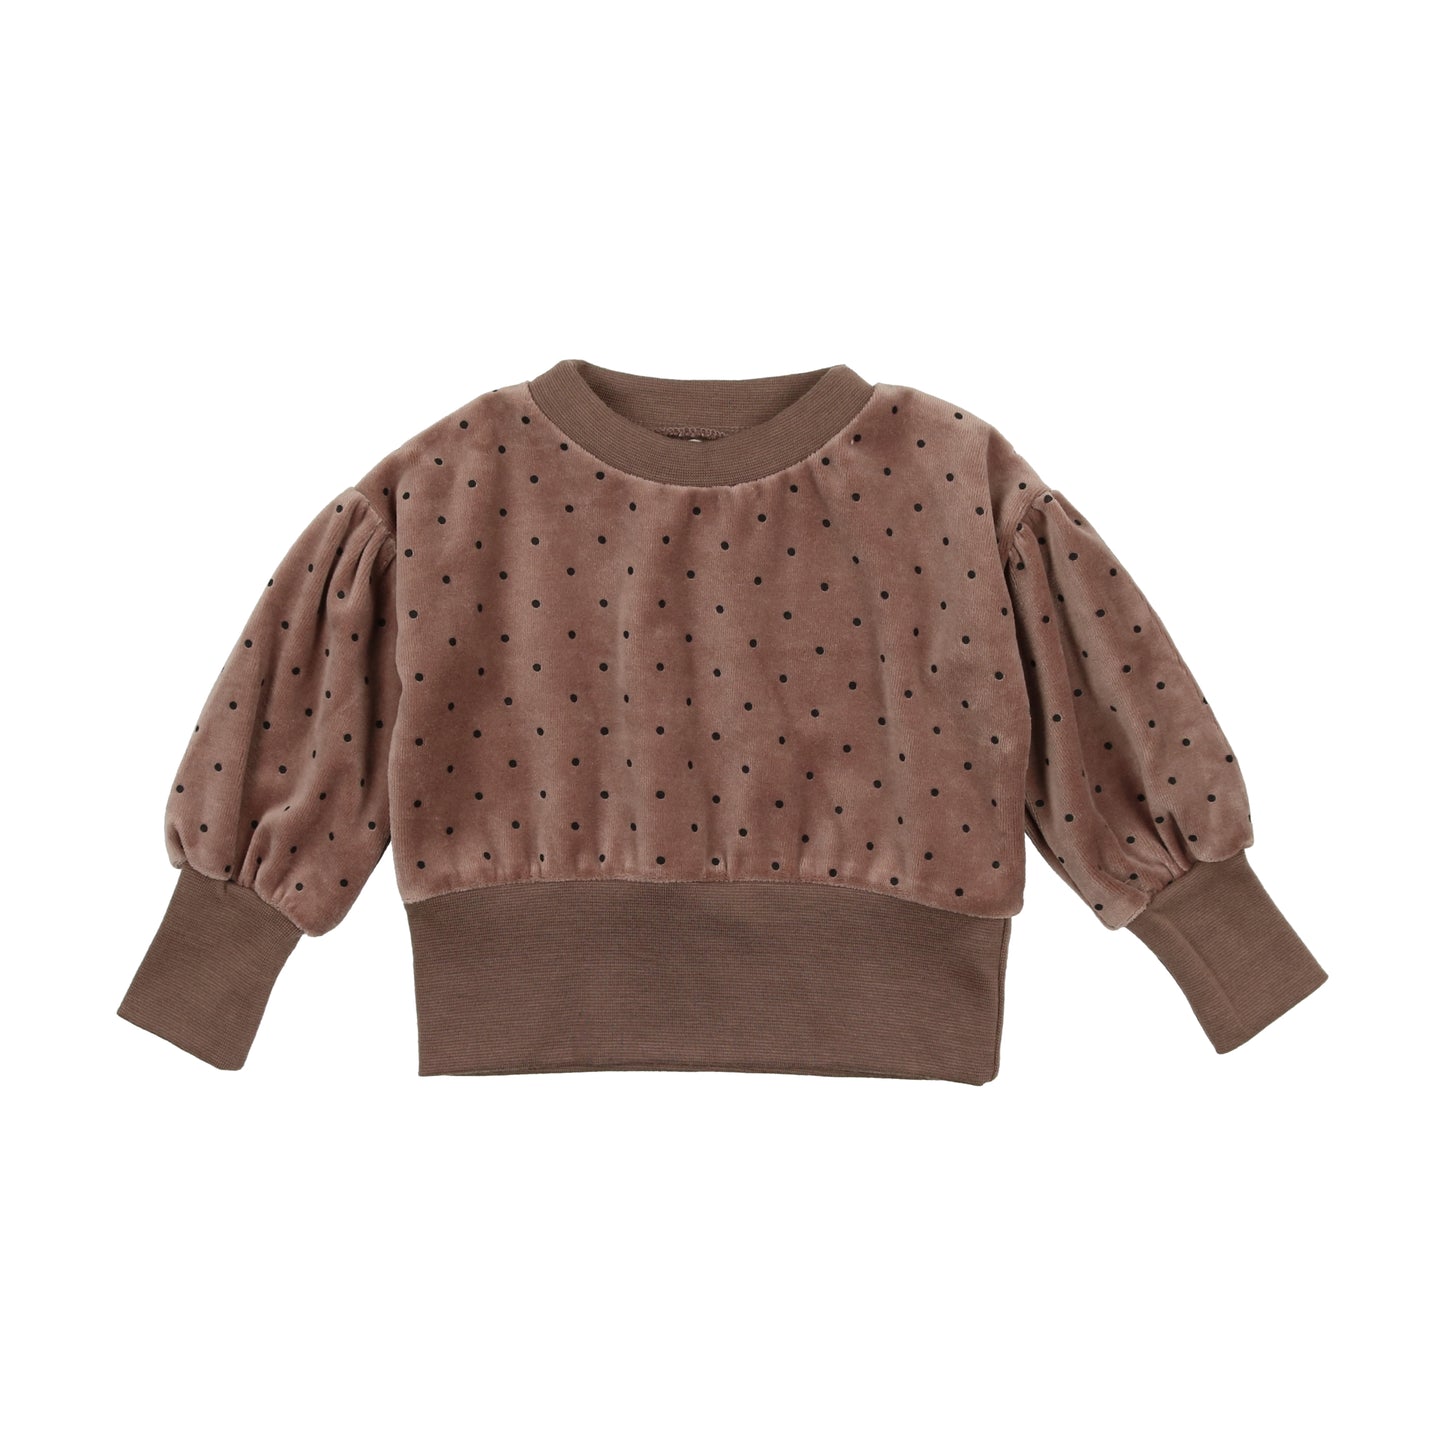 Analogie Taupe Dotted Velour Puff Sleeve Sweatshirt [Final Sale]